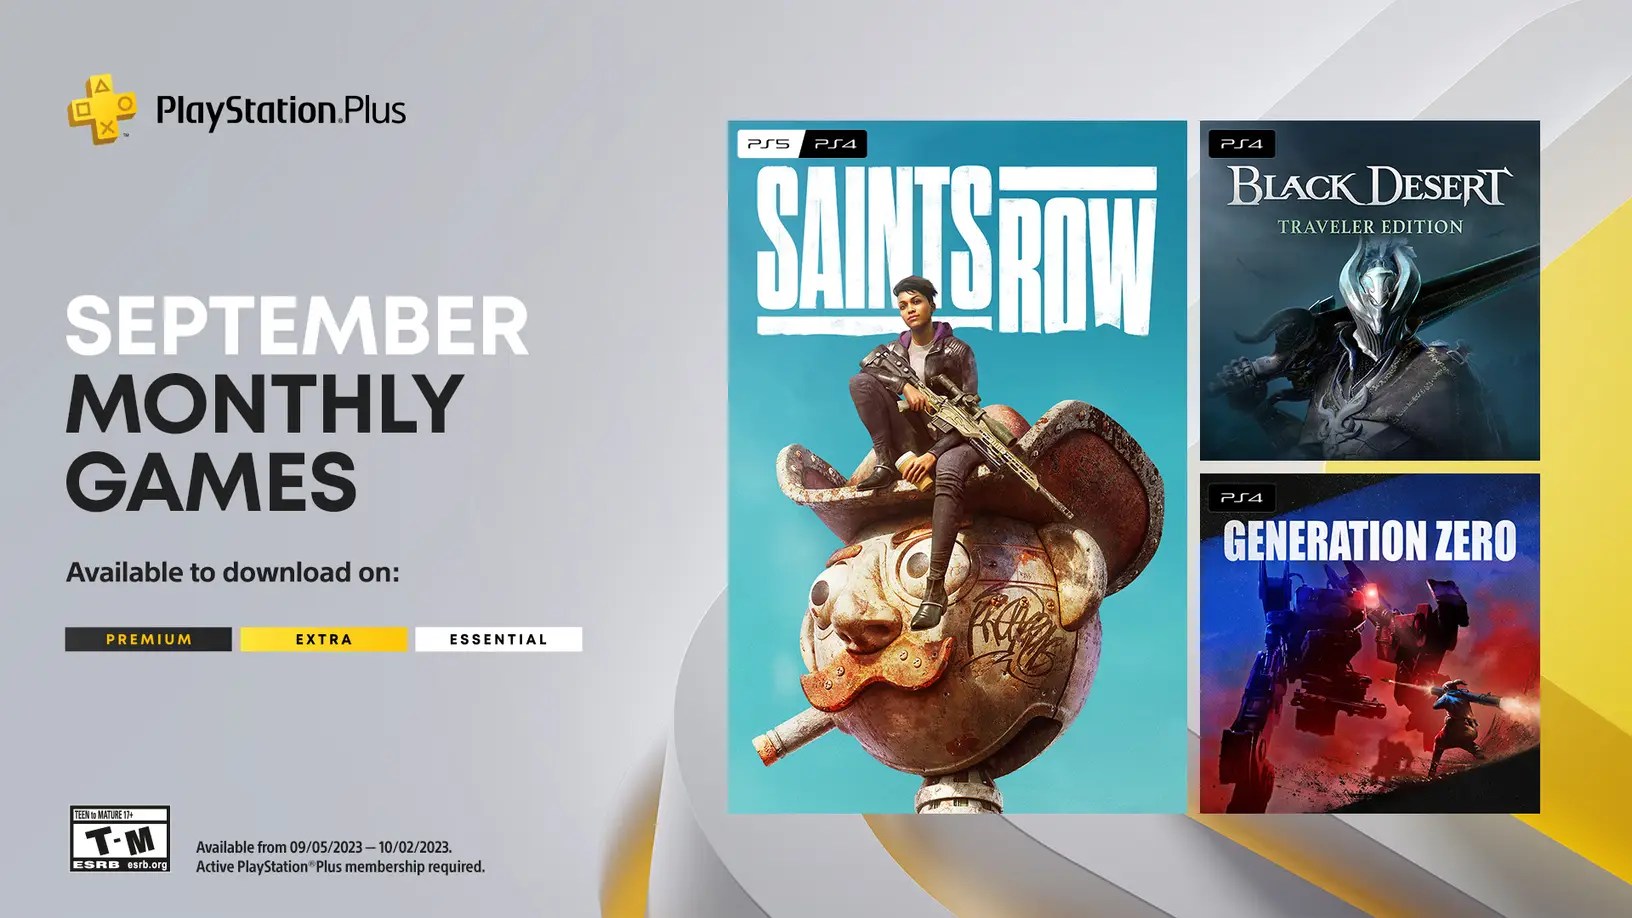 Your PlayStation Plus subscription is about to get pricier